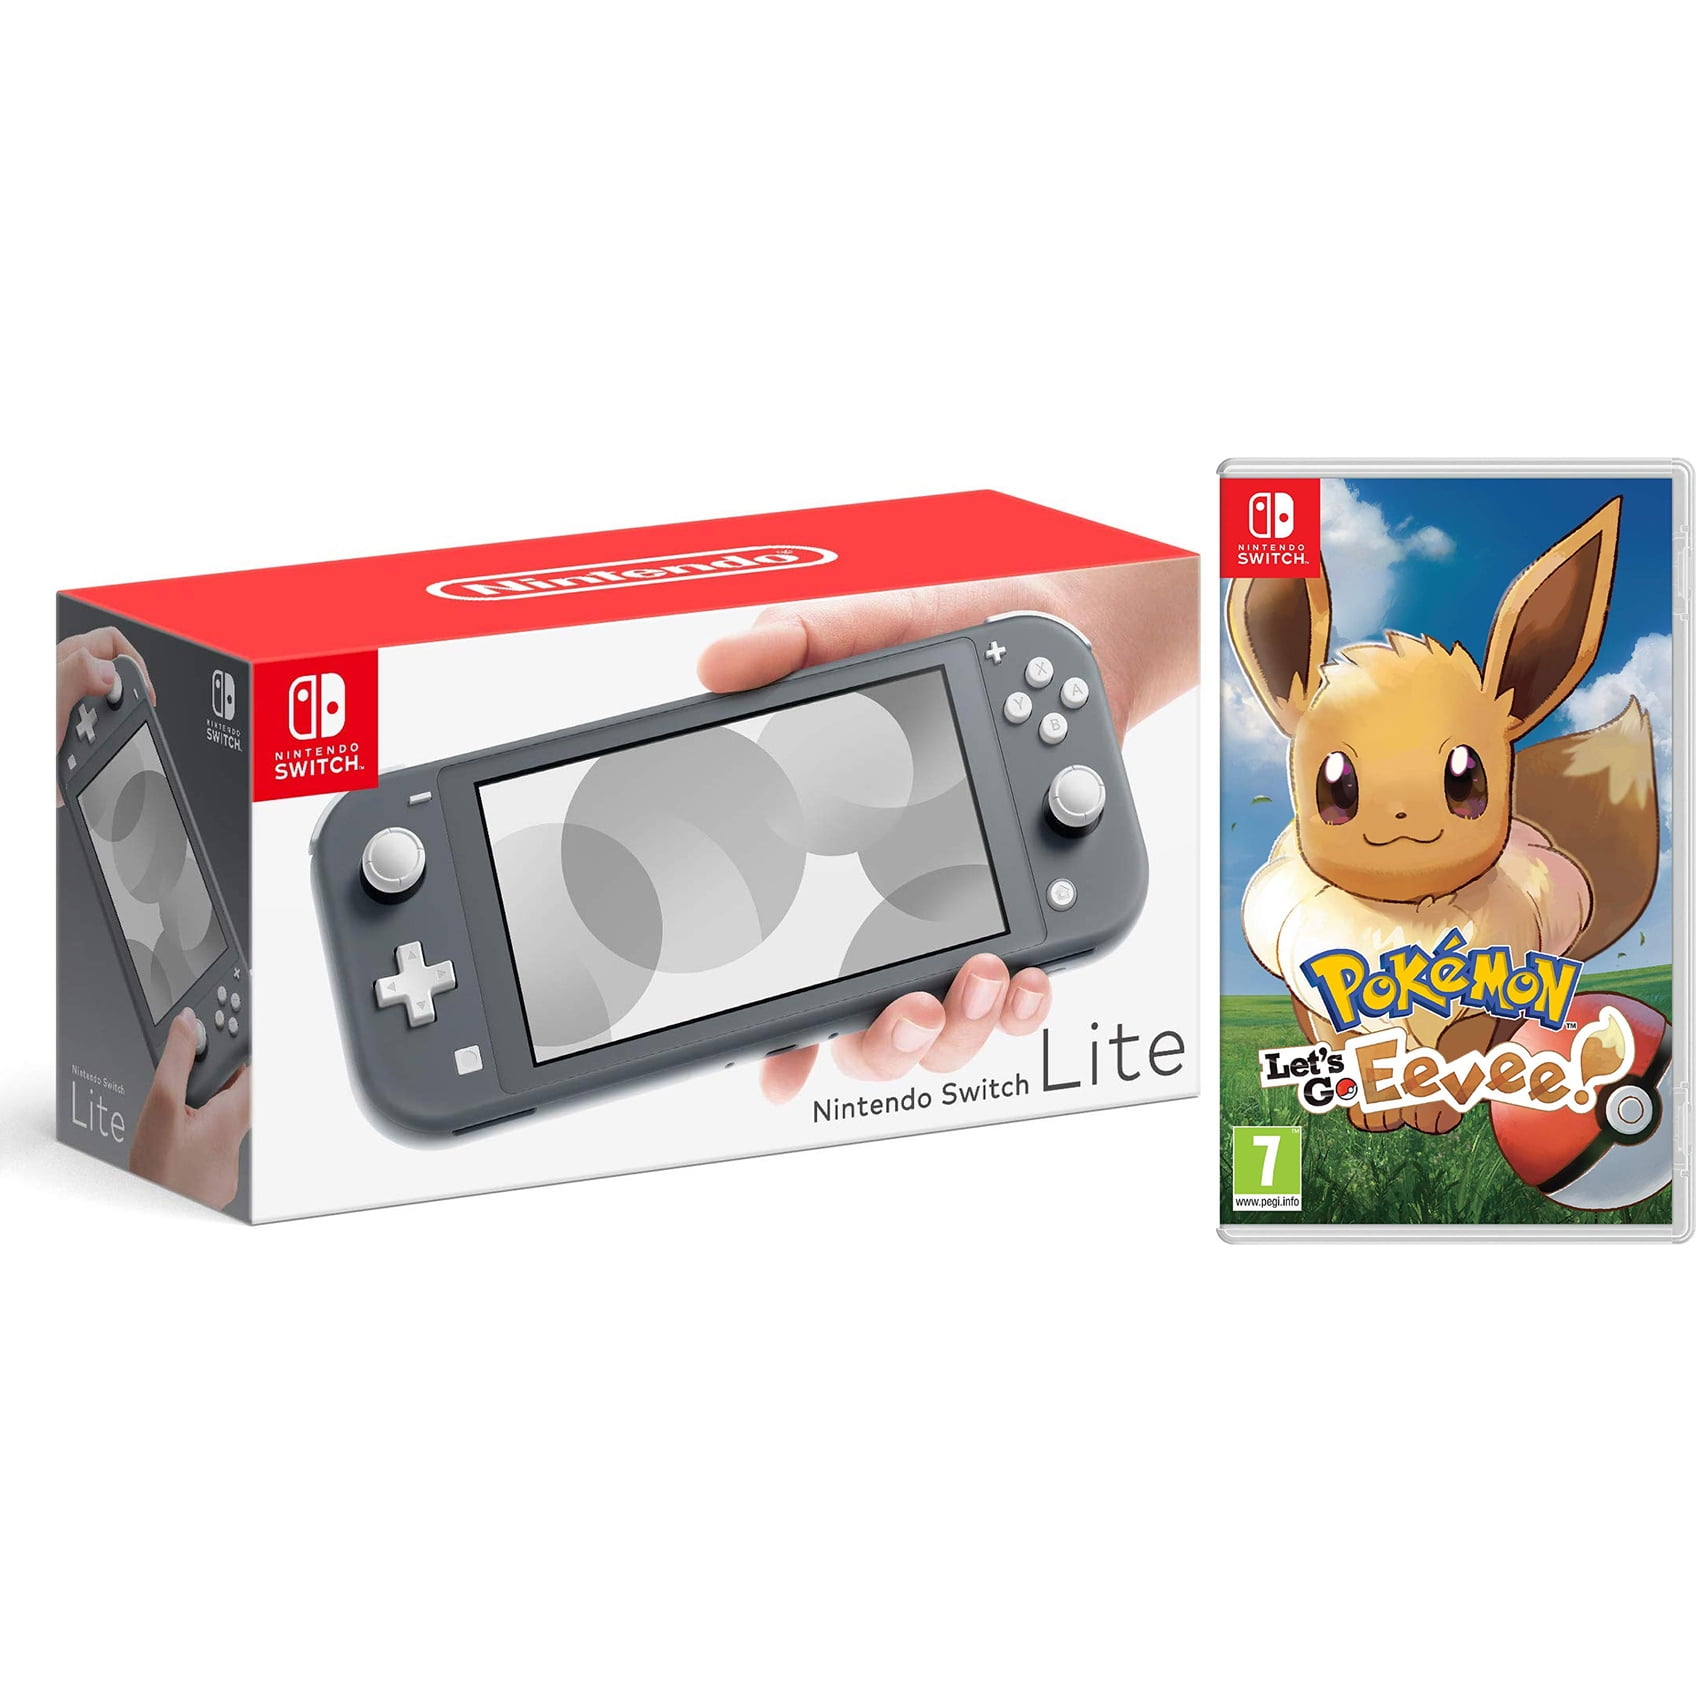 Nintendo Switch Lite Pokemon Eevee Cheaper Than Retail Price Buy Clothing Accessories And Lifestyle Products For Women Men